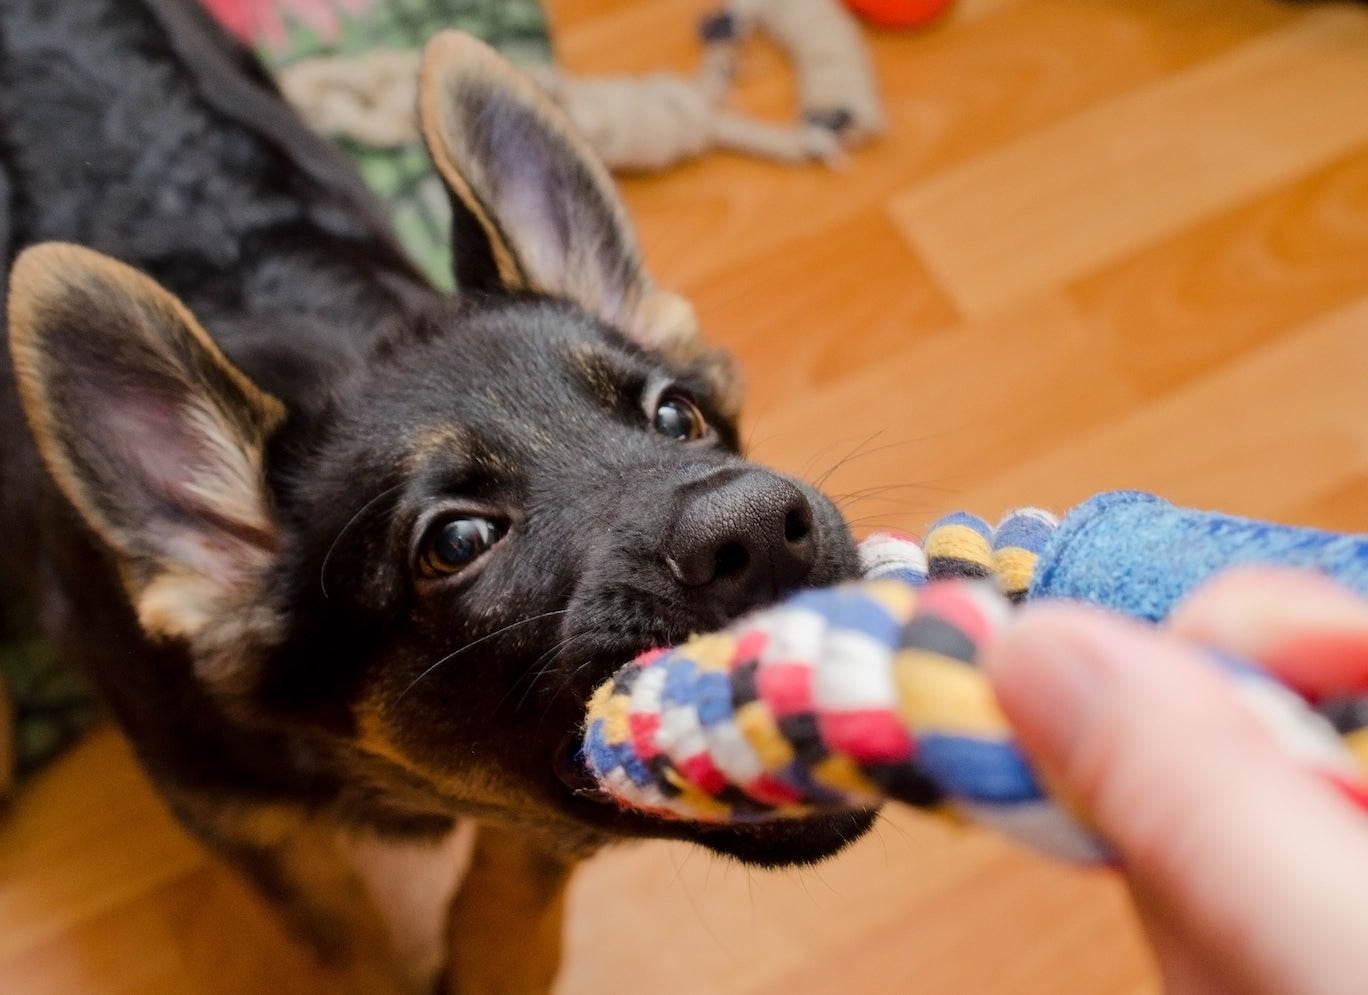 3 Easy-to-Make DIY Enrichment Toys for Dogs